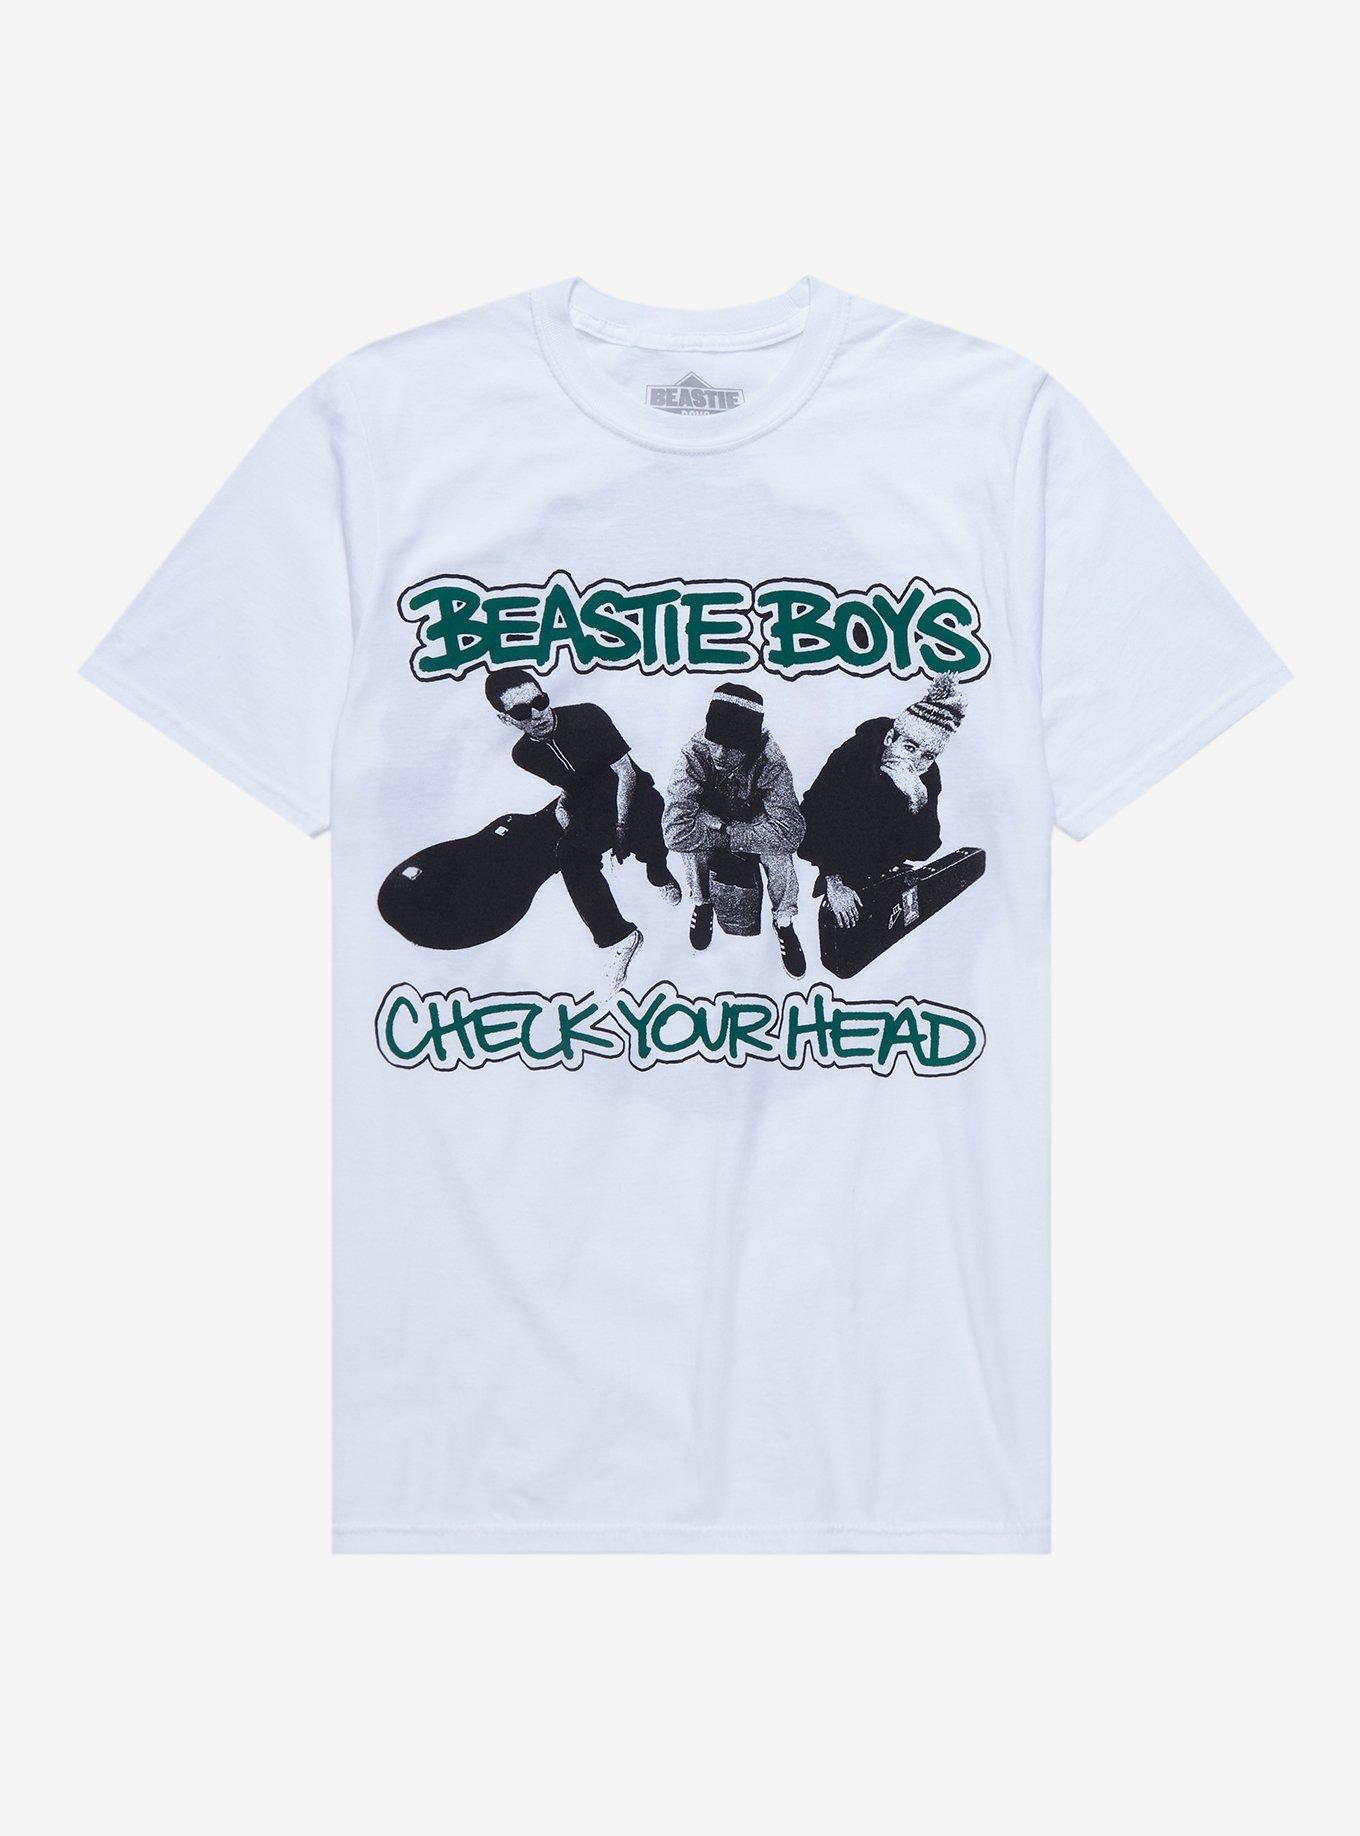 Beastie Boys Check Your Head T-Shirt | Hot Topic